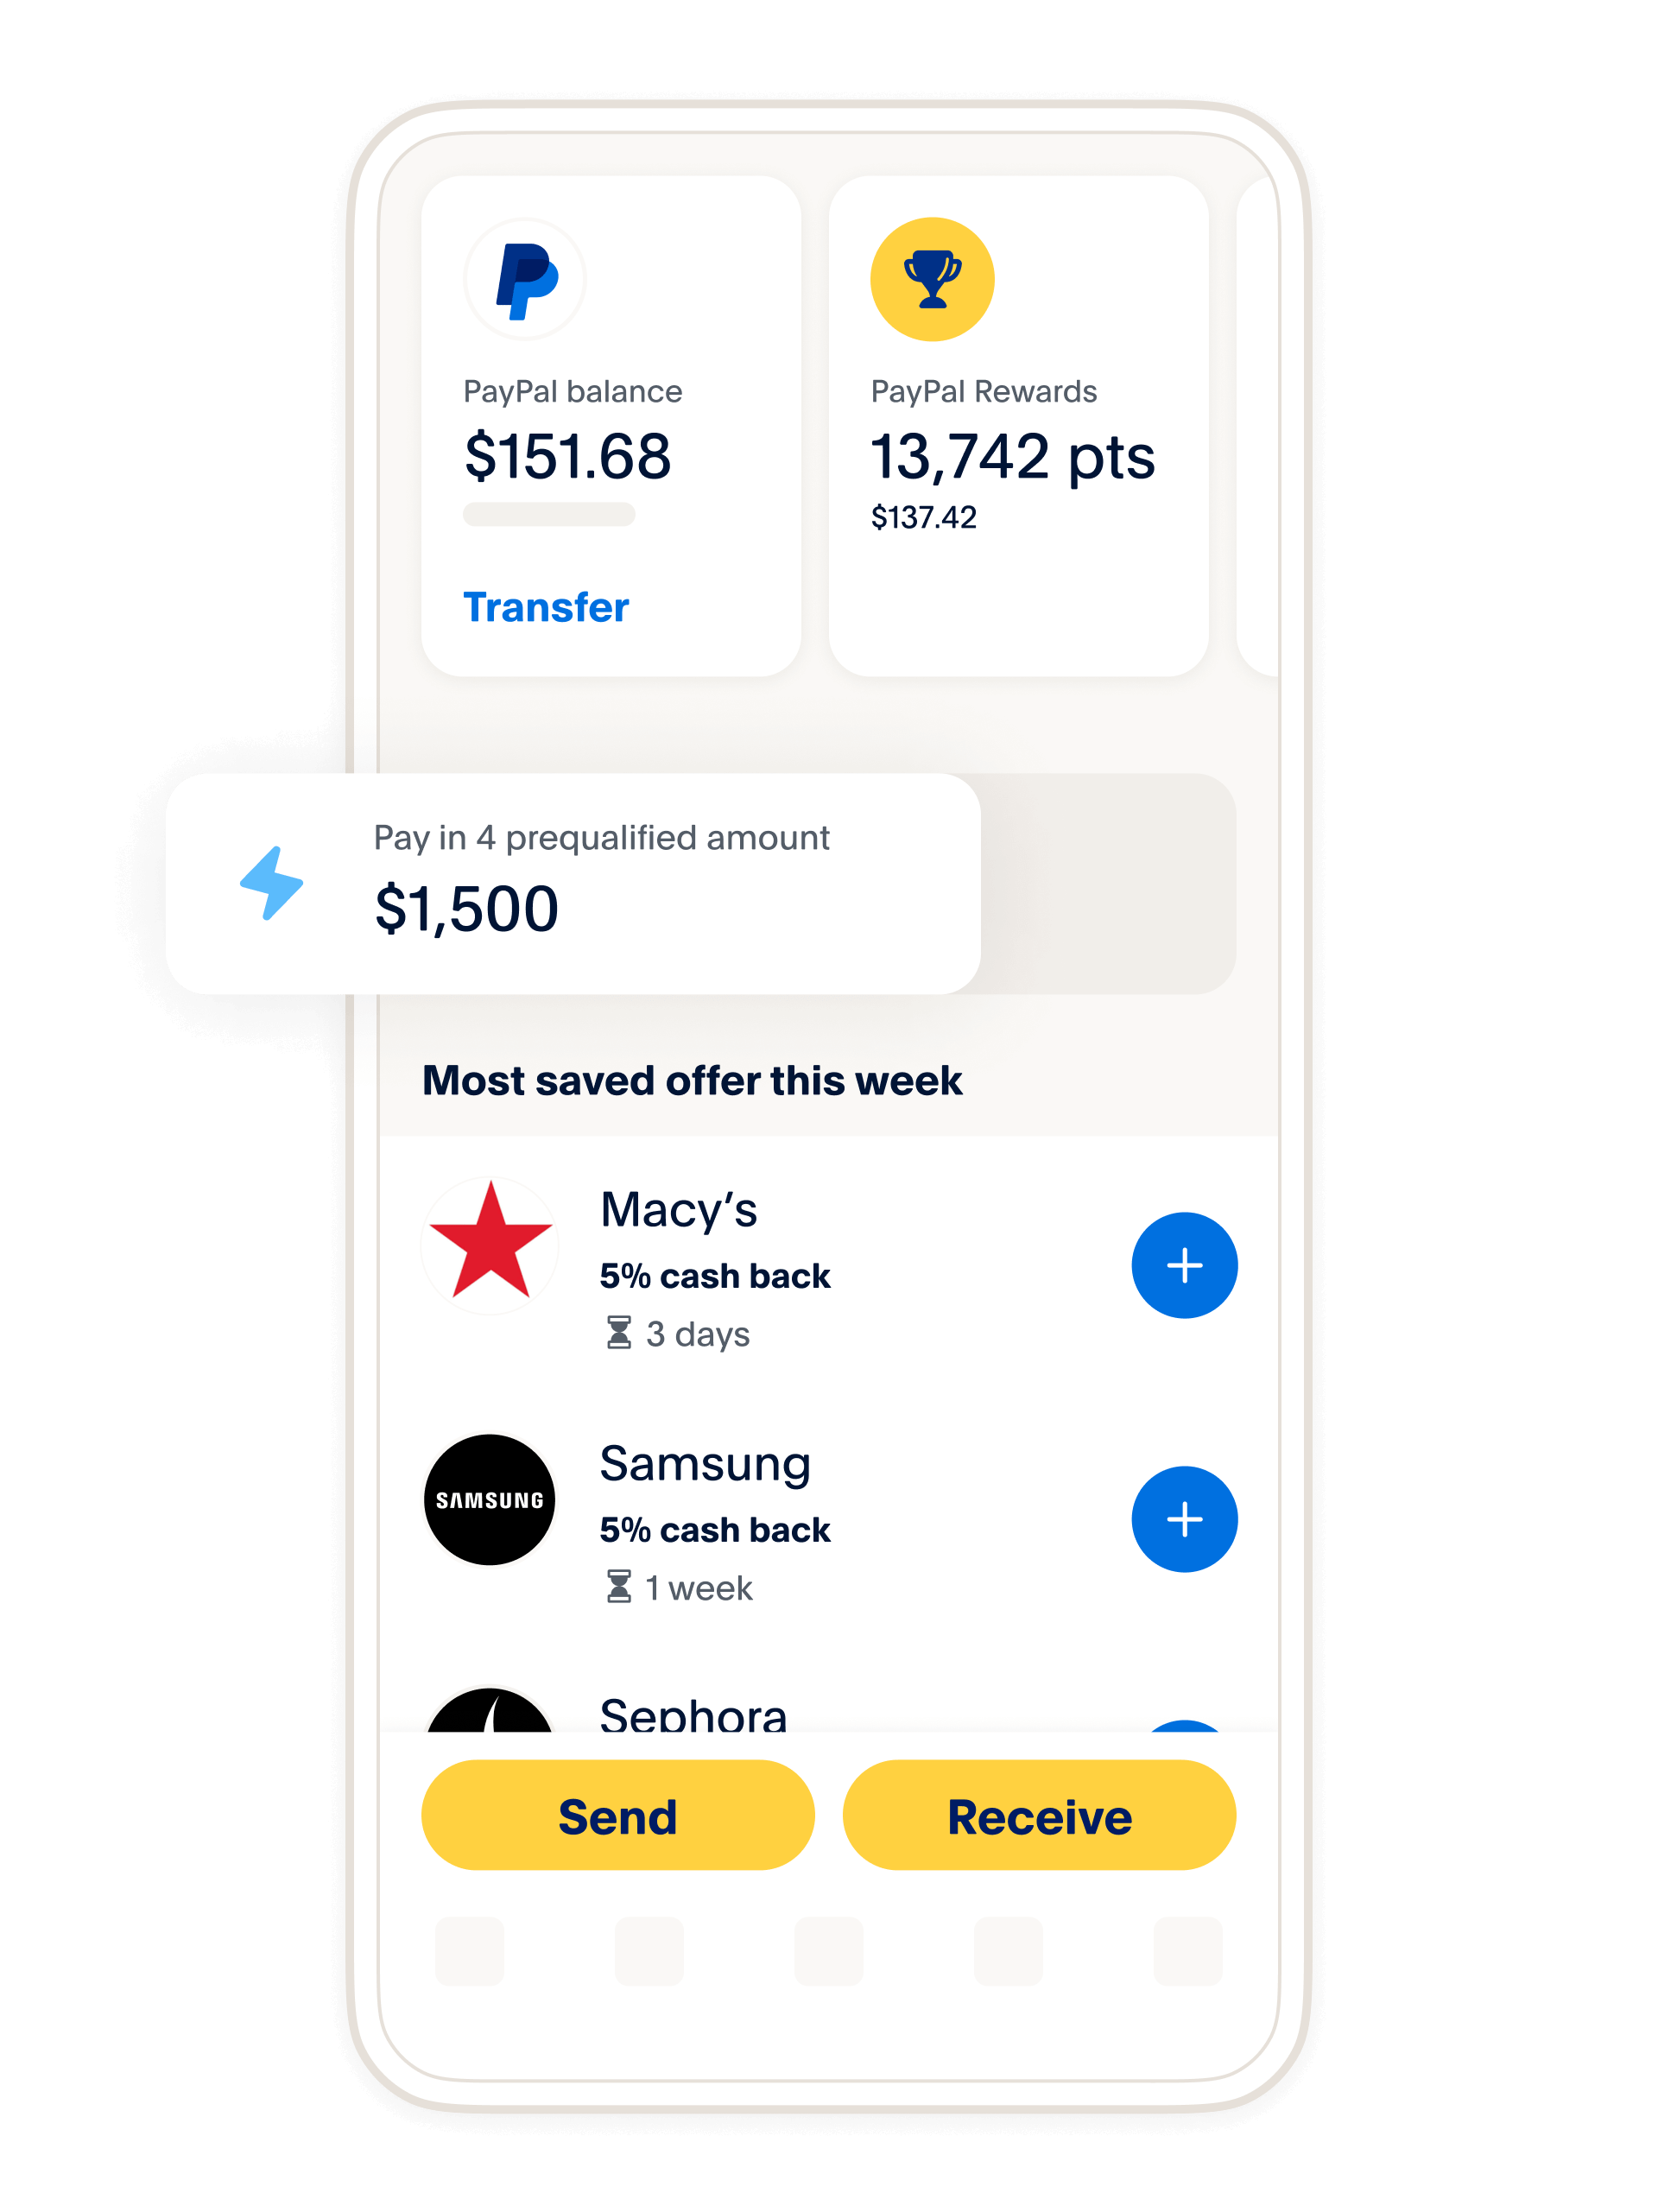 https://www.paypalobjects.com/marketing/web/US/en/rebrand/PayPal-app/paypal-app-hero-size-mobile-up.png